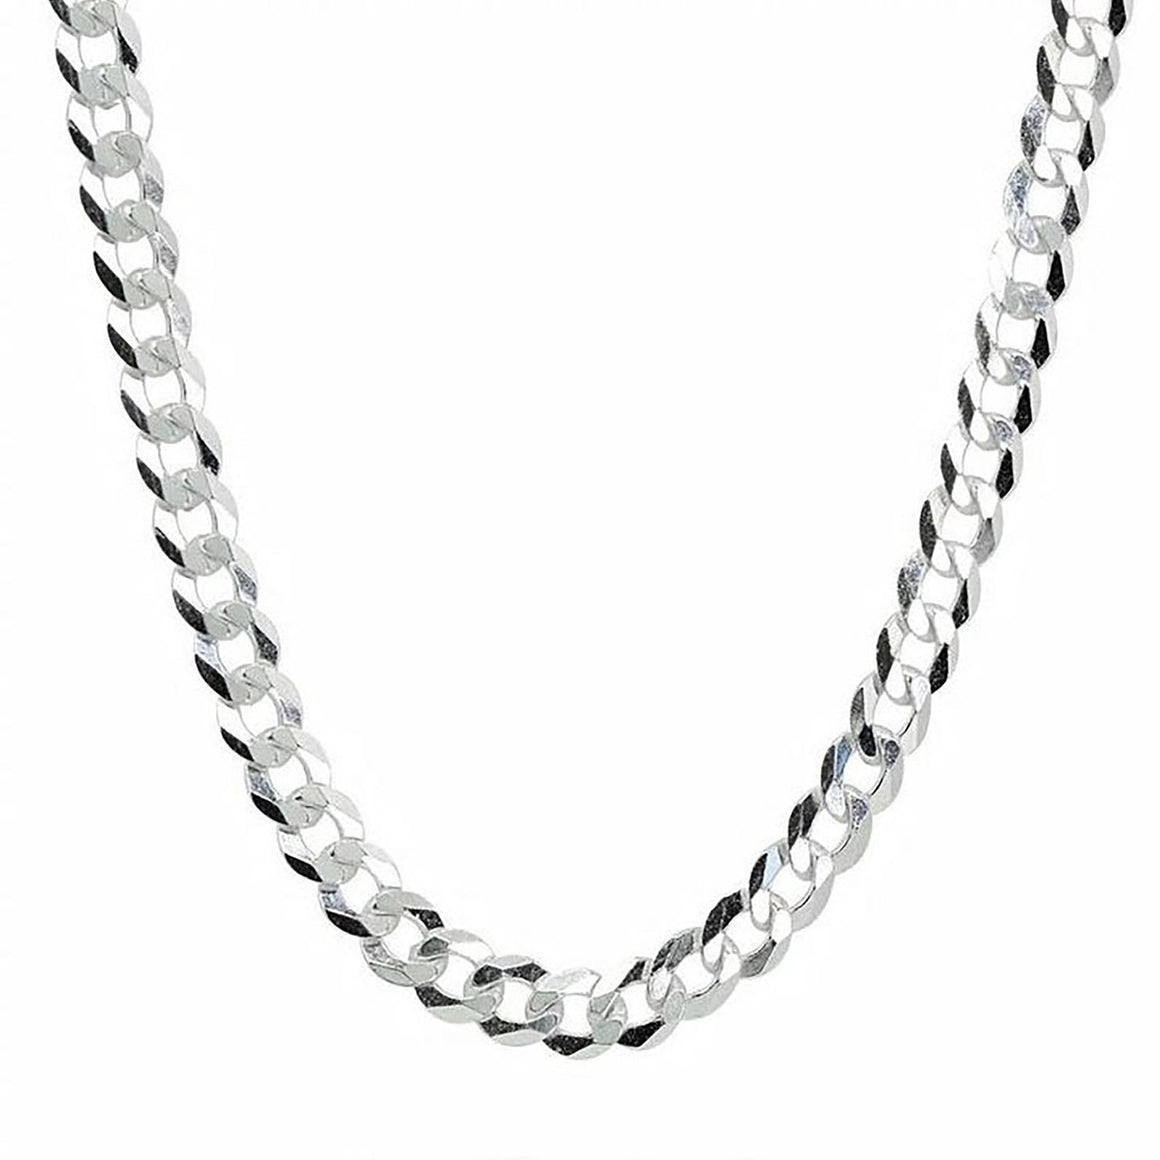 54 FLORAL 8mm CURB 925 STERLING SILVER NECKLACE CHAIN